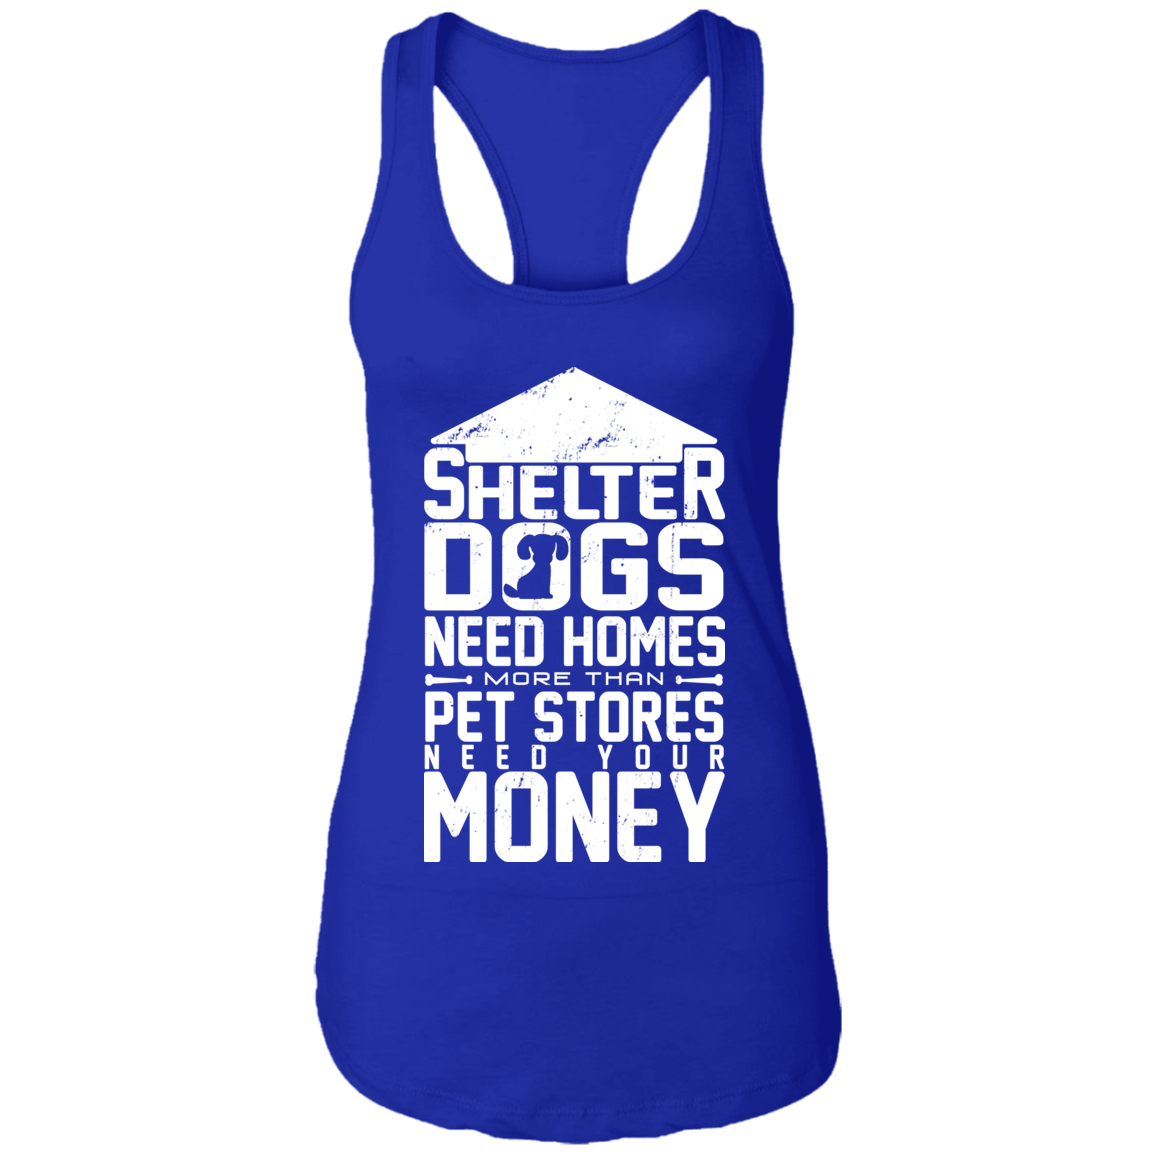 Shelter Dogs Need Homes - Ladies Racer Back Tank.